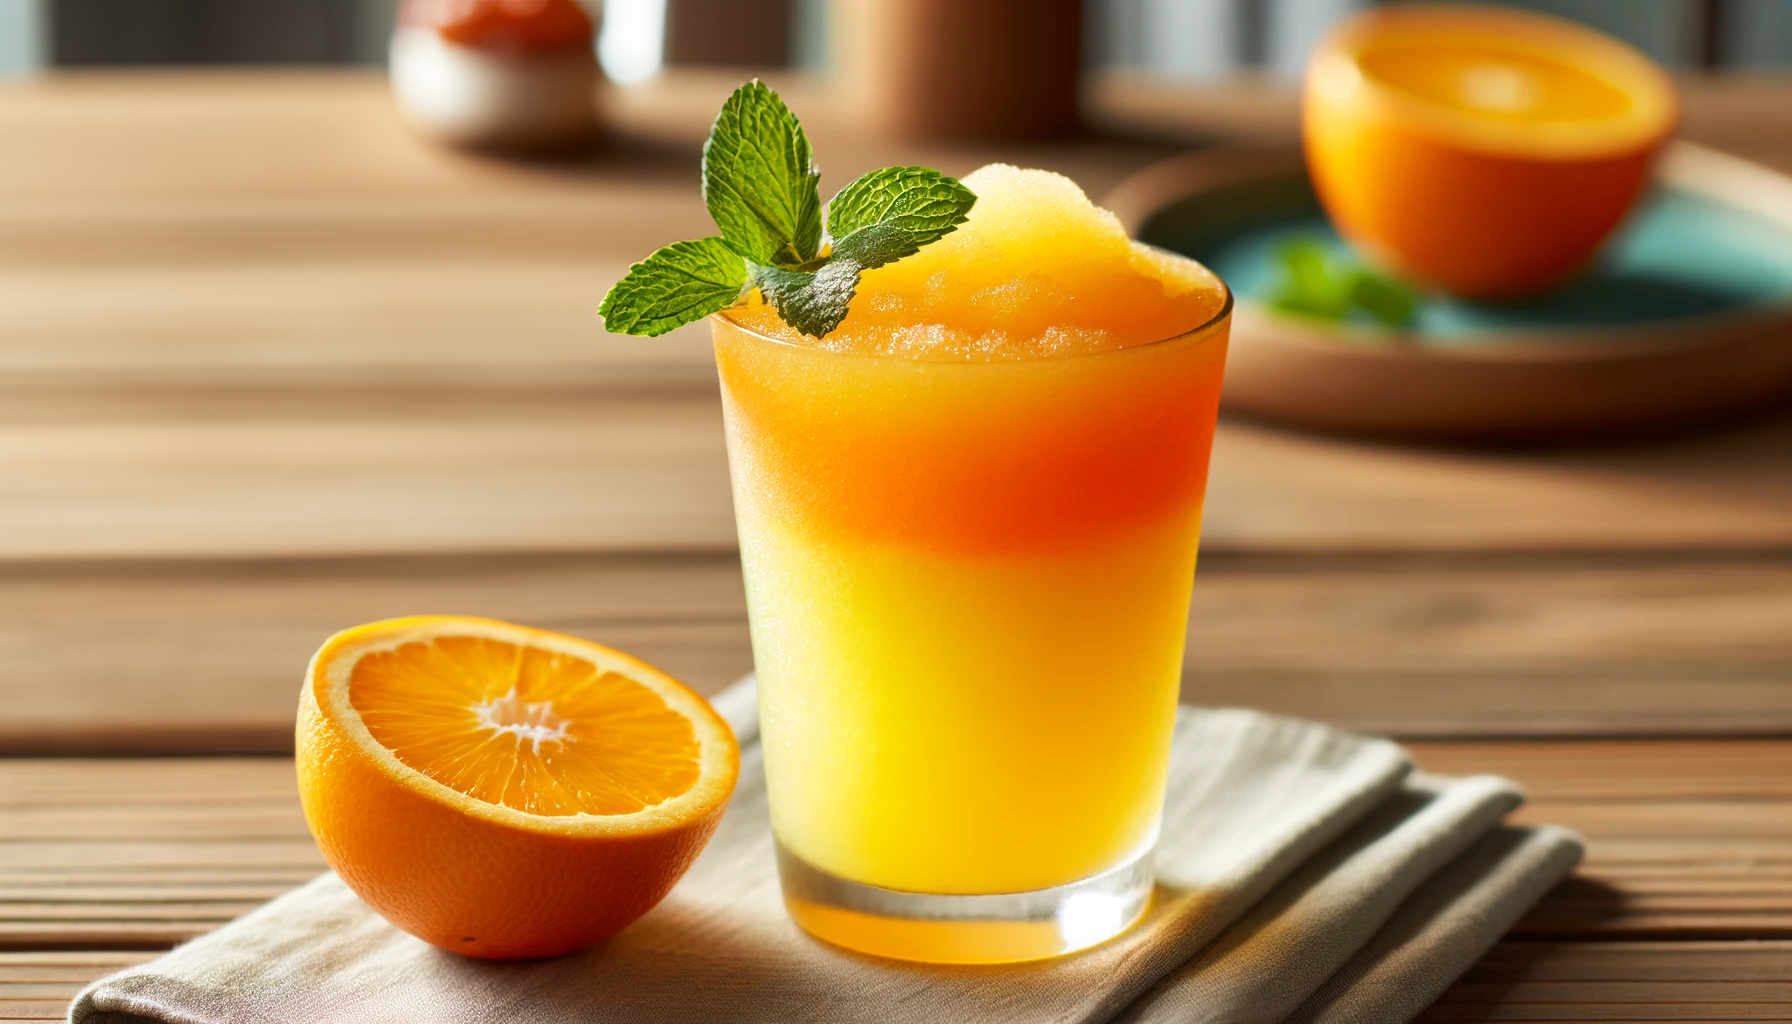 A refreshing icy cocktail that captures the fresh orange taste.